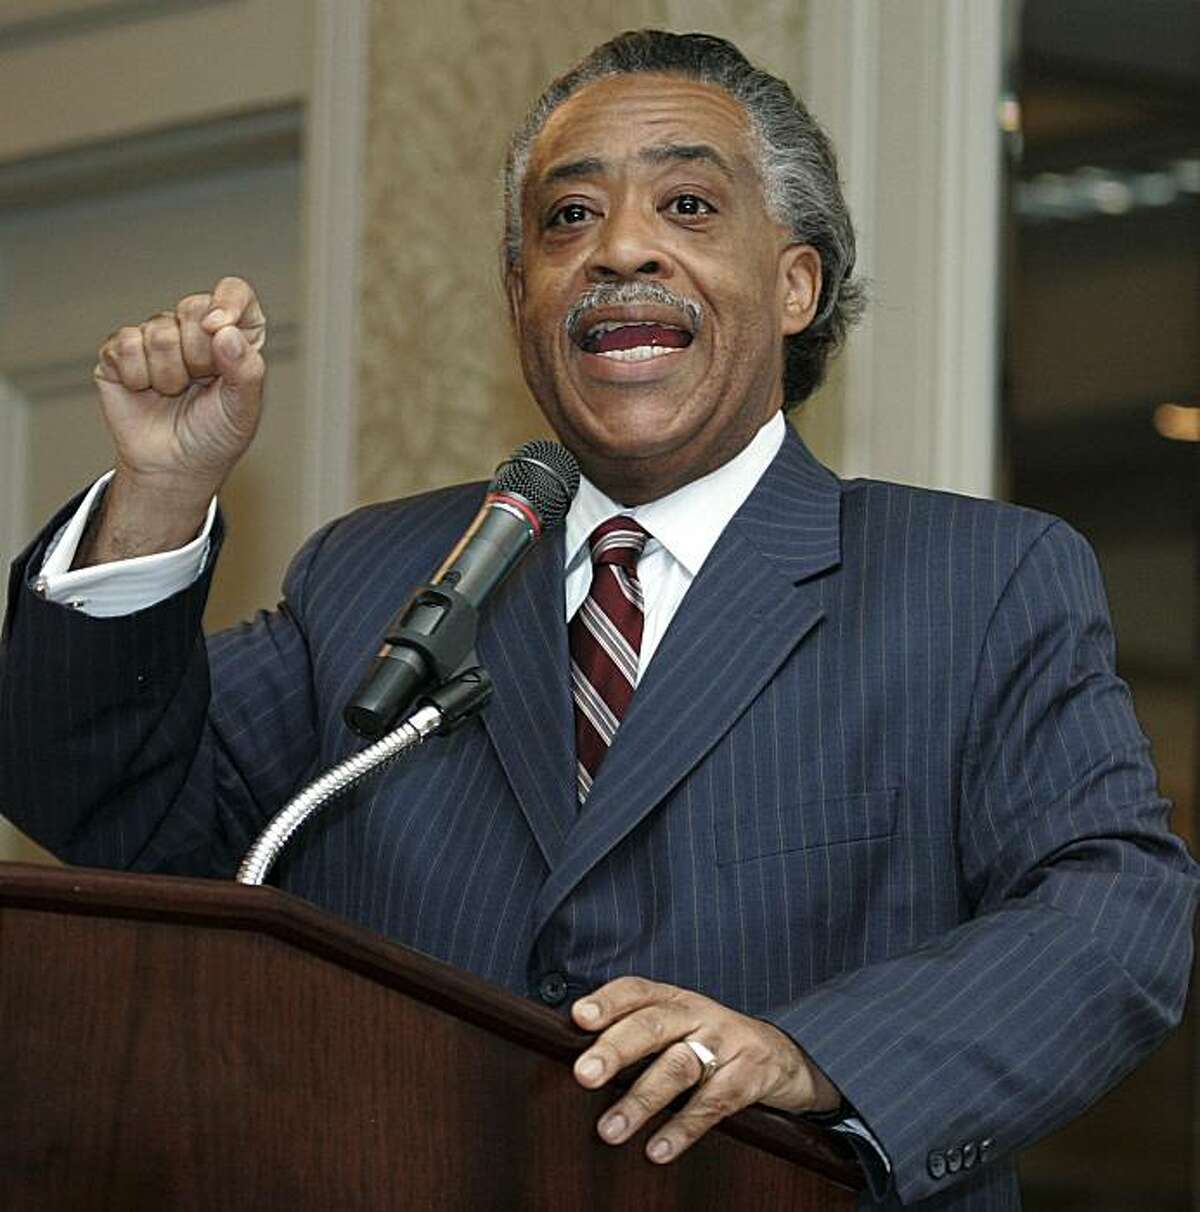 The Rev. Al Sharpton addresses the Southern Christian Leadership Conference in Kenner, Tuesday, July 29, 2008. The group, founded in New Orleans, is holding its 50th anniversary convention in the area this week. (AP Photo/Bill Haber)